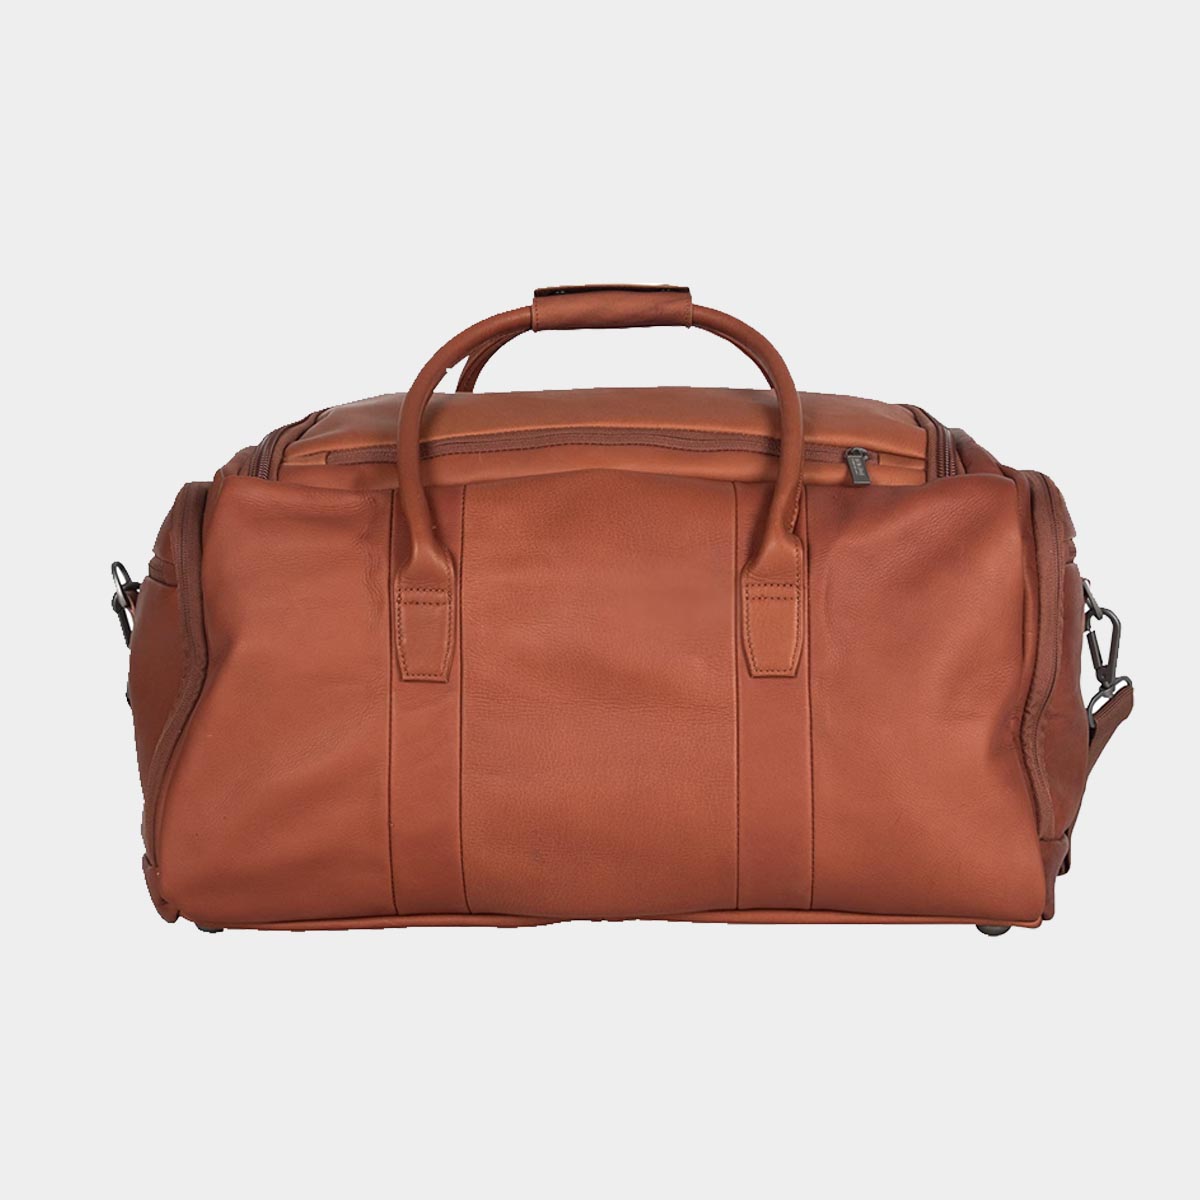 Elegance Unleashed The Refined Leather Travel Duffle Bag